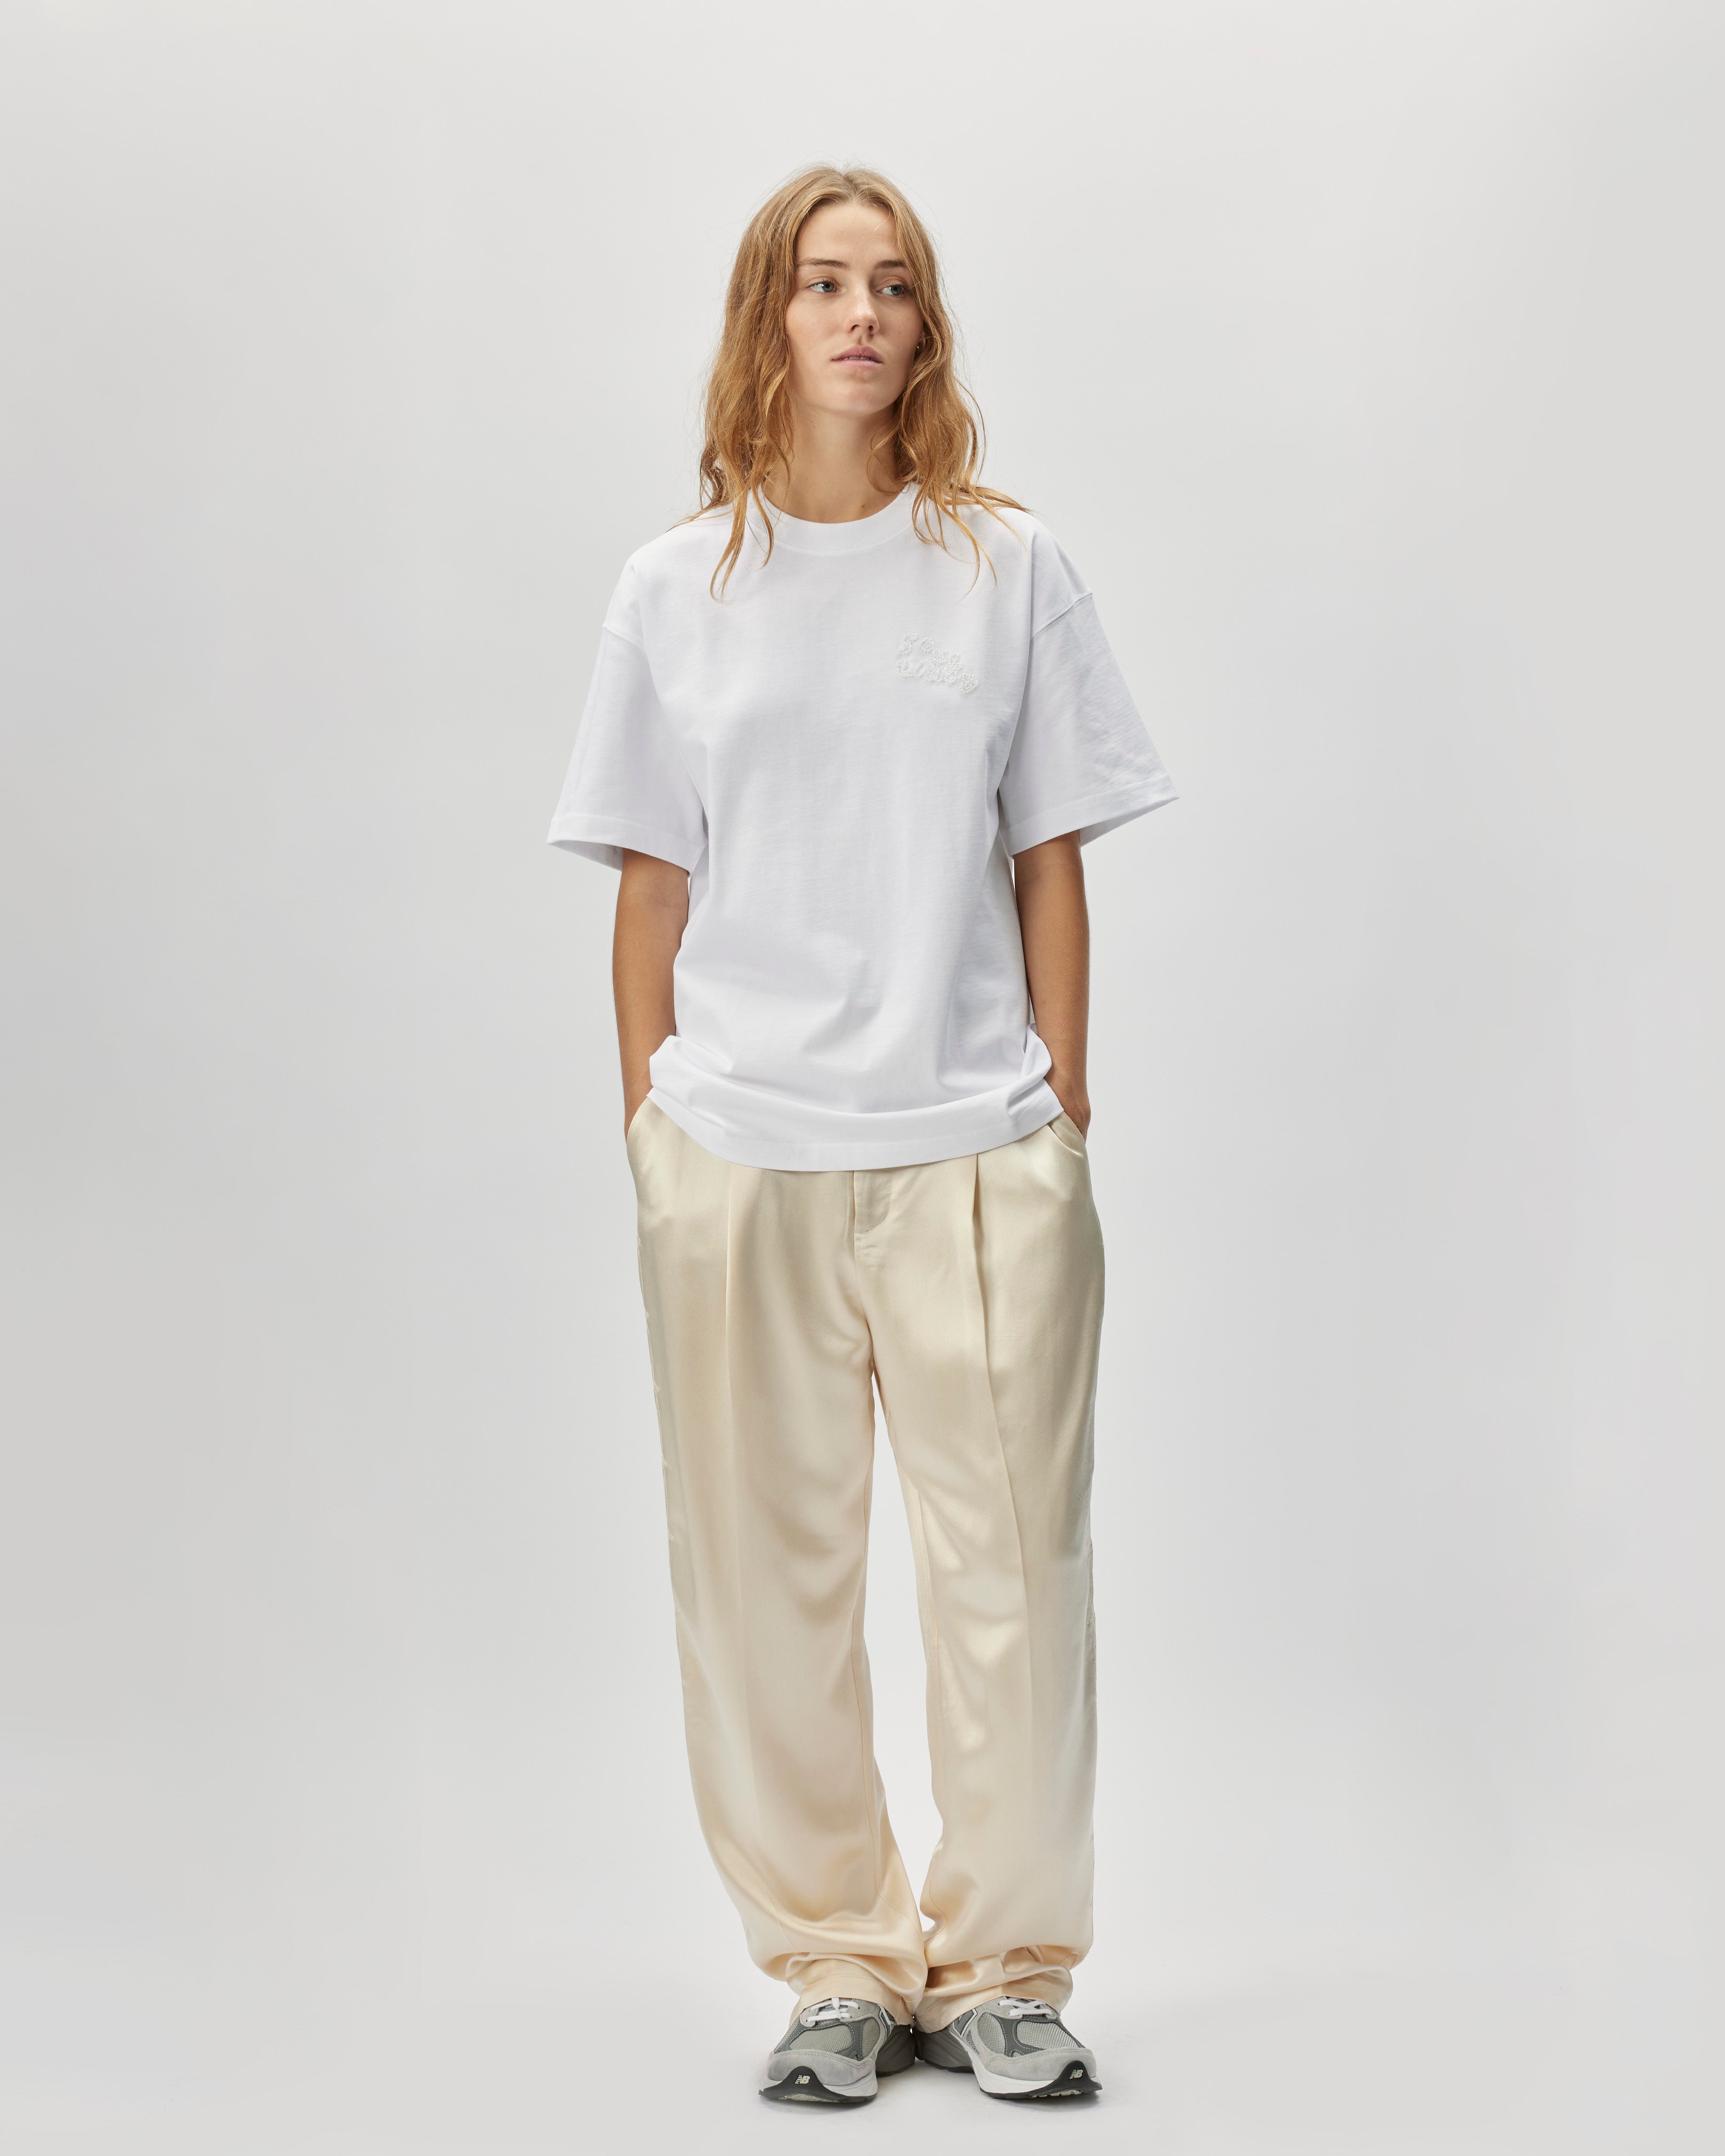 Soulland Ula Embroided Pant Off White 32051-1225